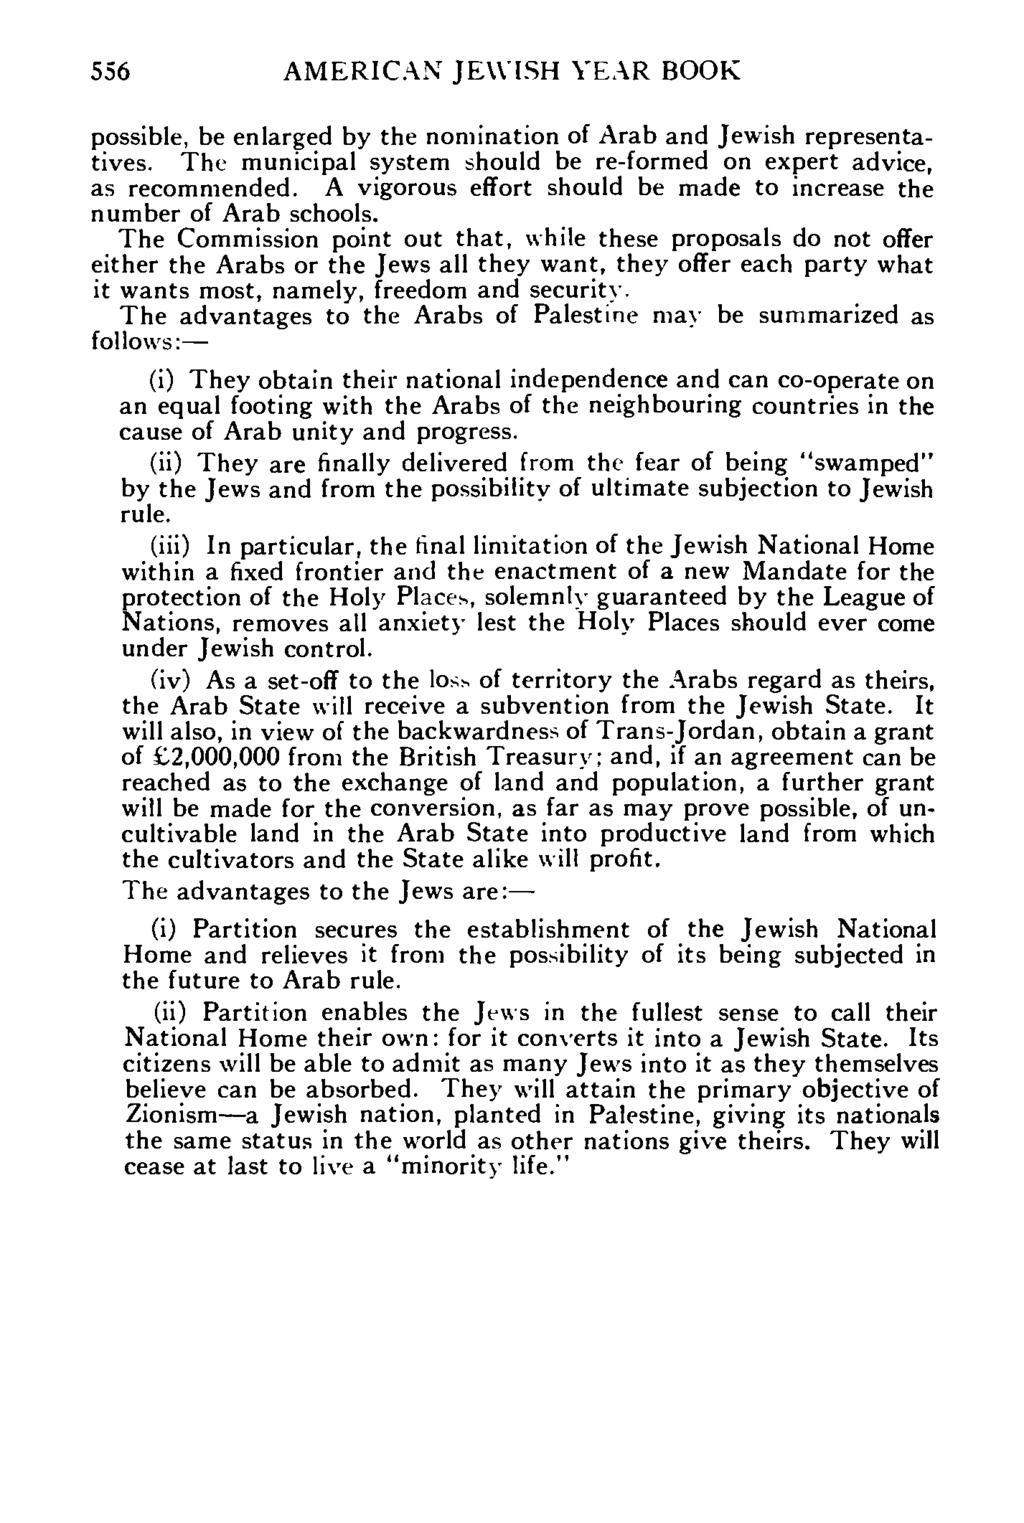 556 AMERICAN JEWISH YEAR BOOK possible, be enlarged by the nomination of Arab and Jewish representatives. The municipal system should be re-formed on expert advice, as recommended.